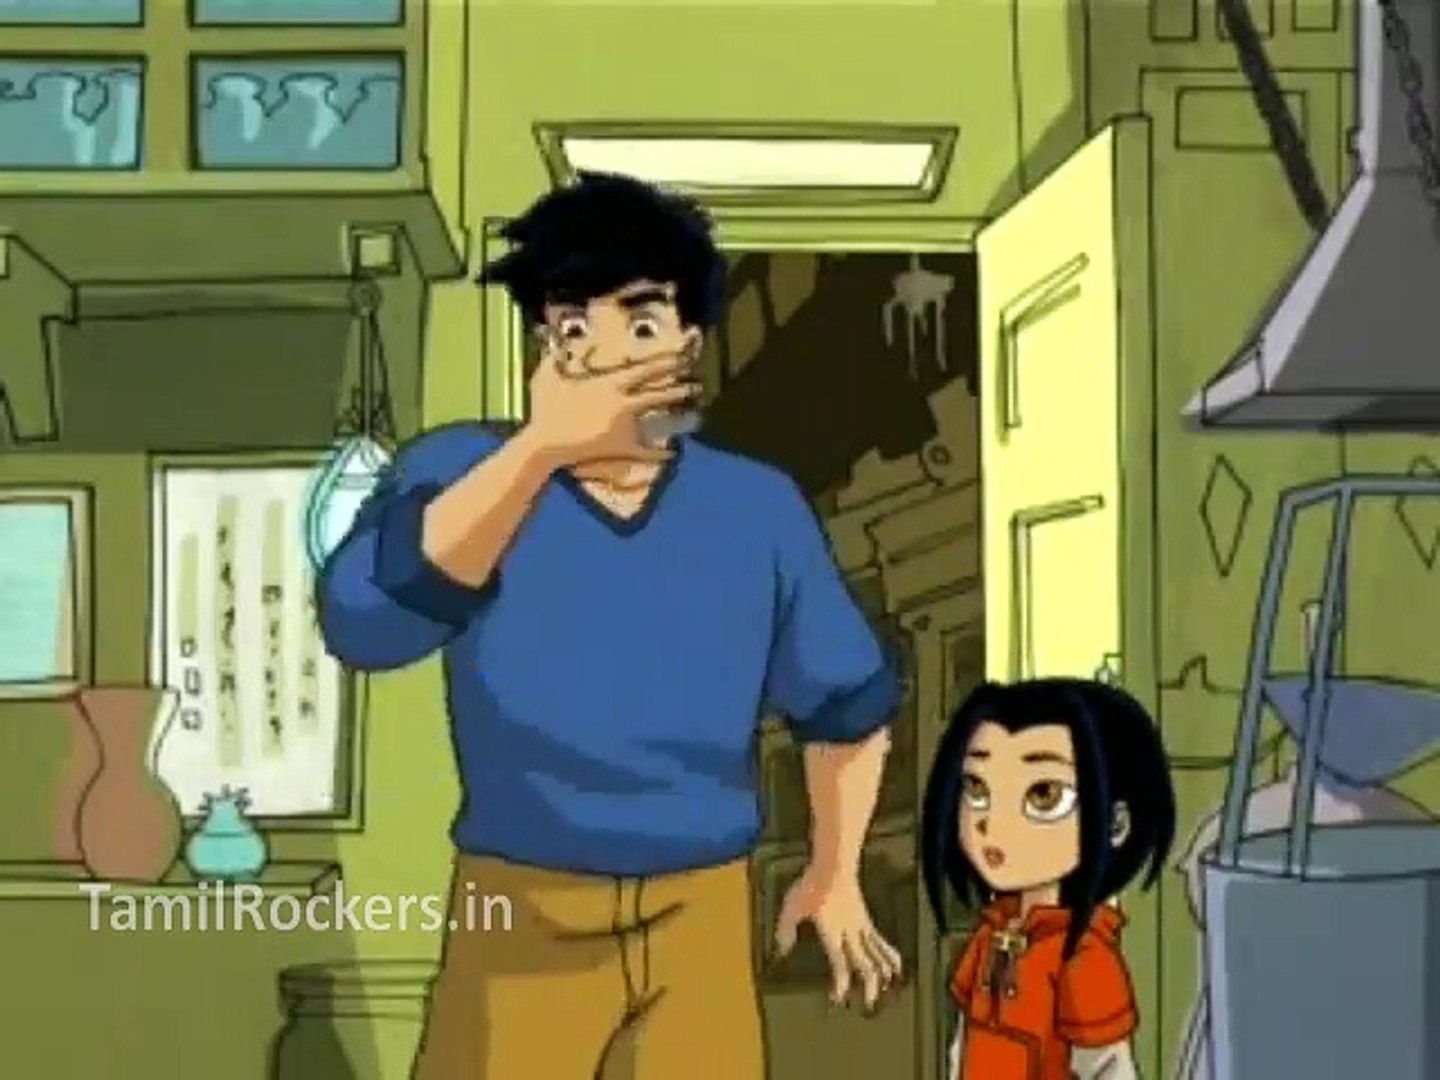 Incredible Compilation of Full 4K Jackie Chan Cartoon Images: Over 999!